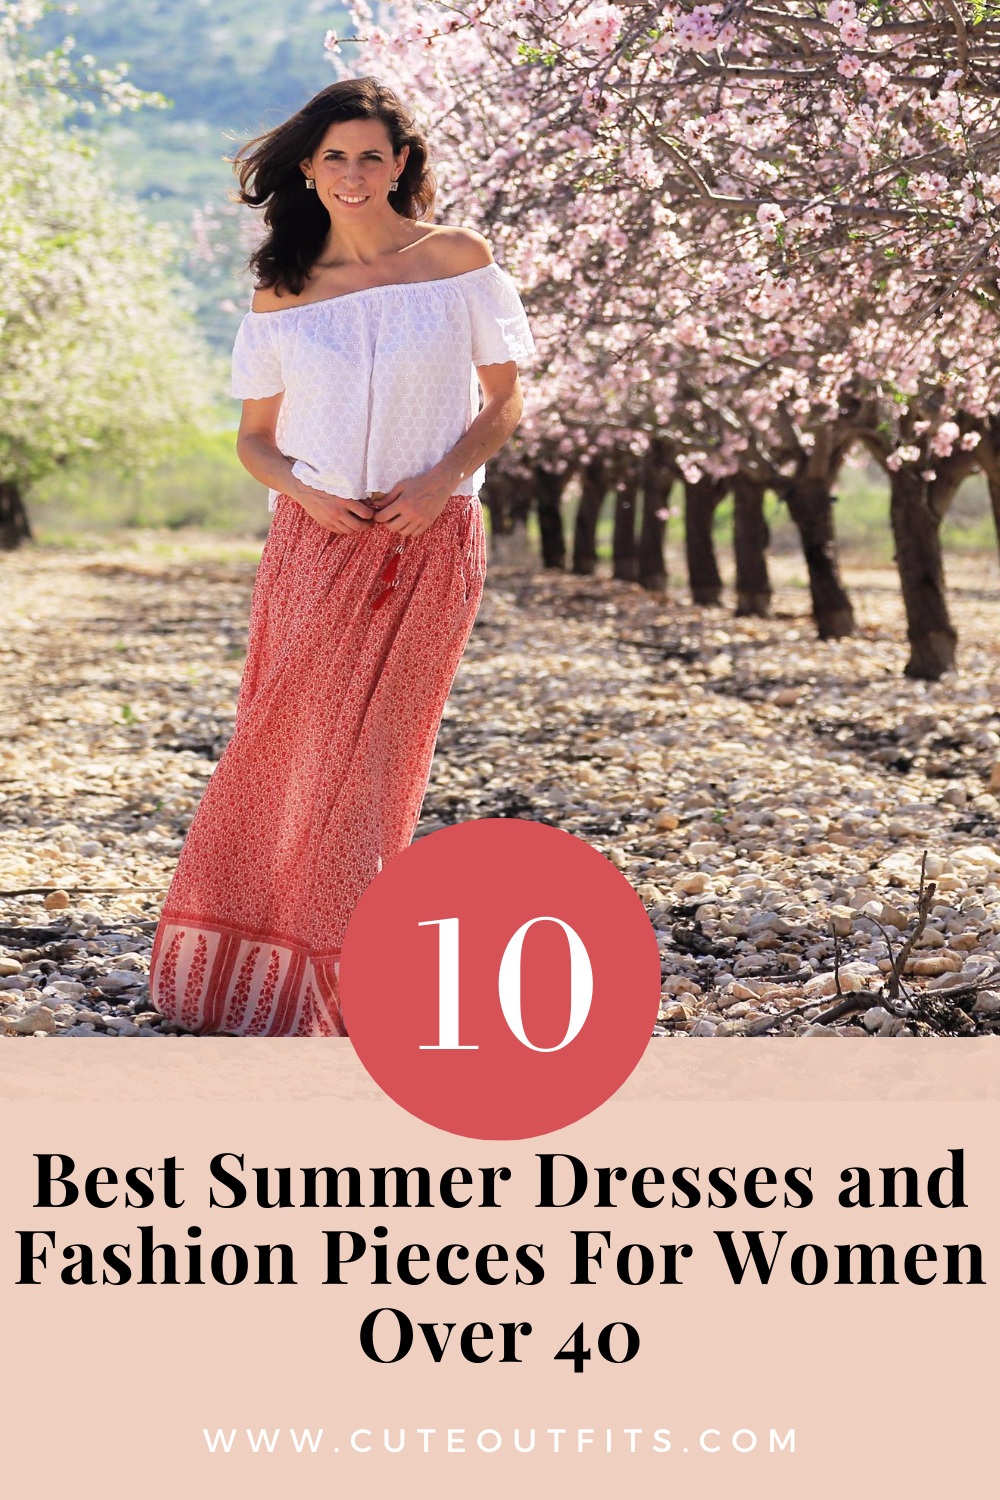 placard | 23 Best Summer Dresses and Fashion Pieces For Women Over 40